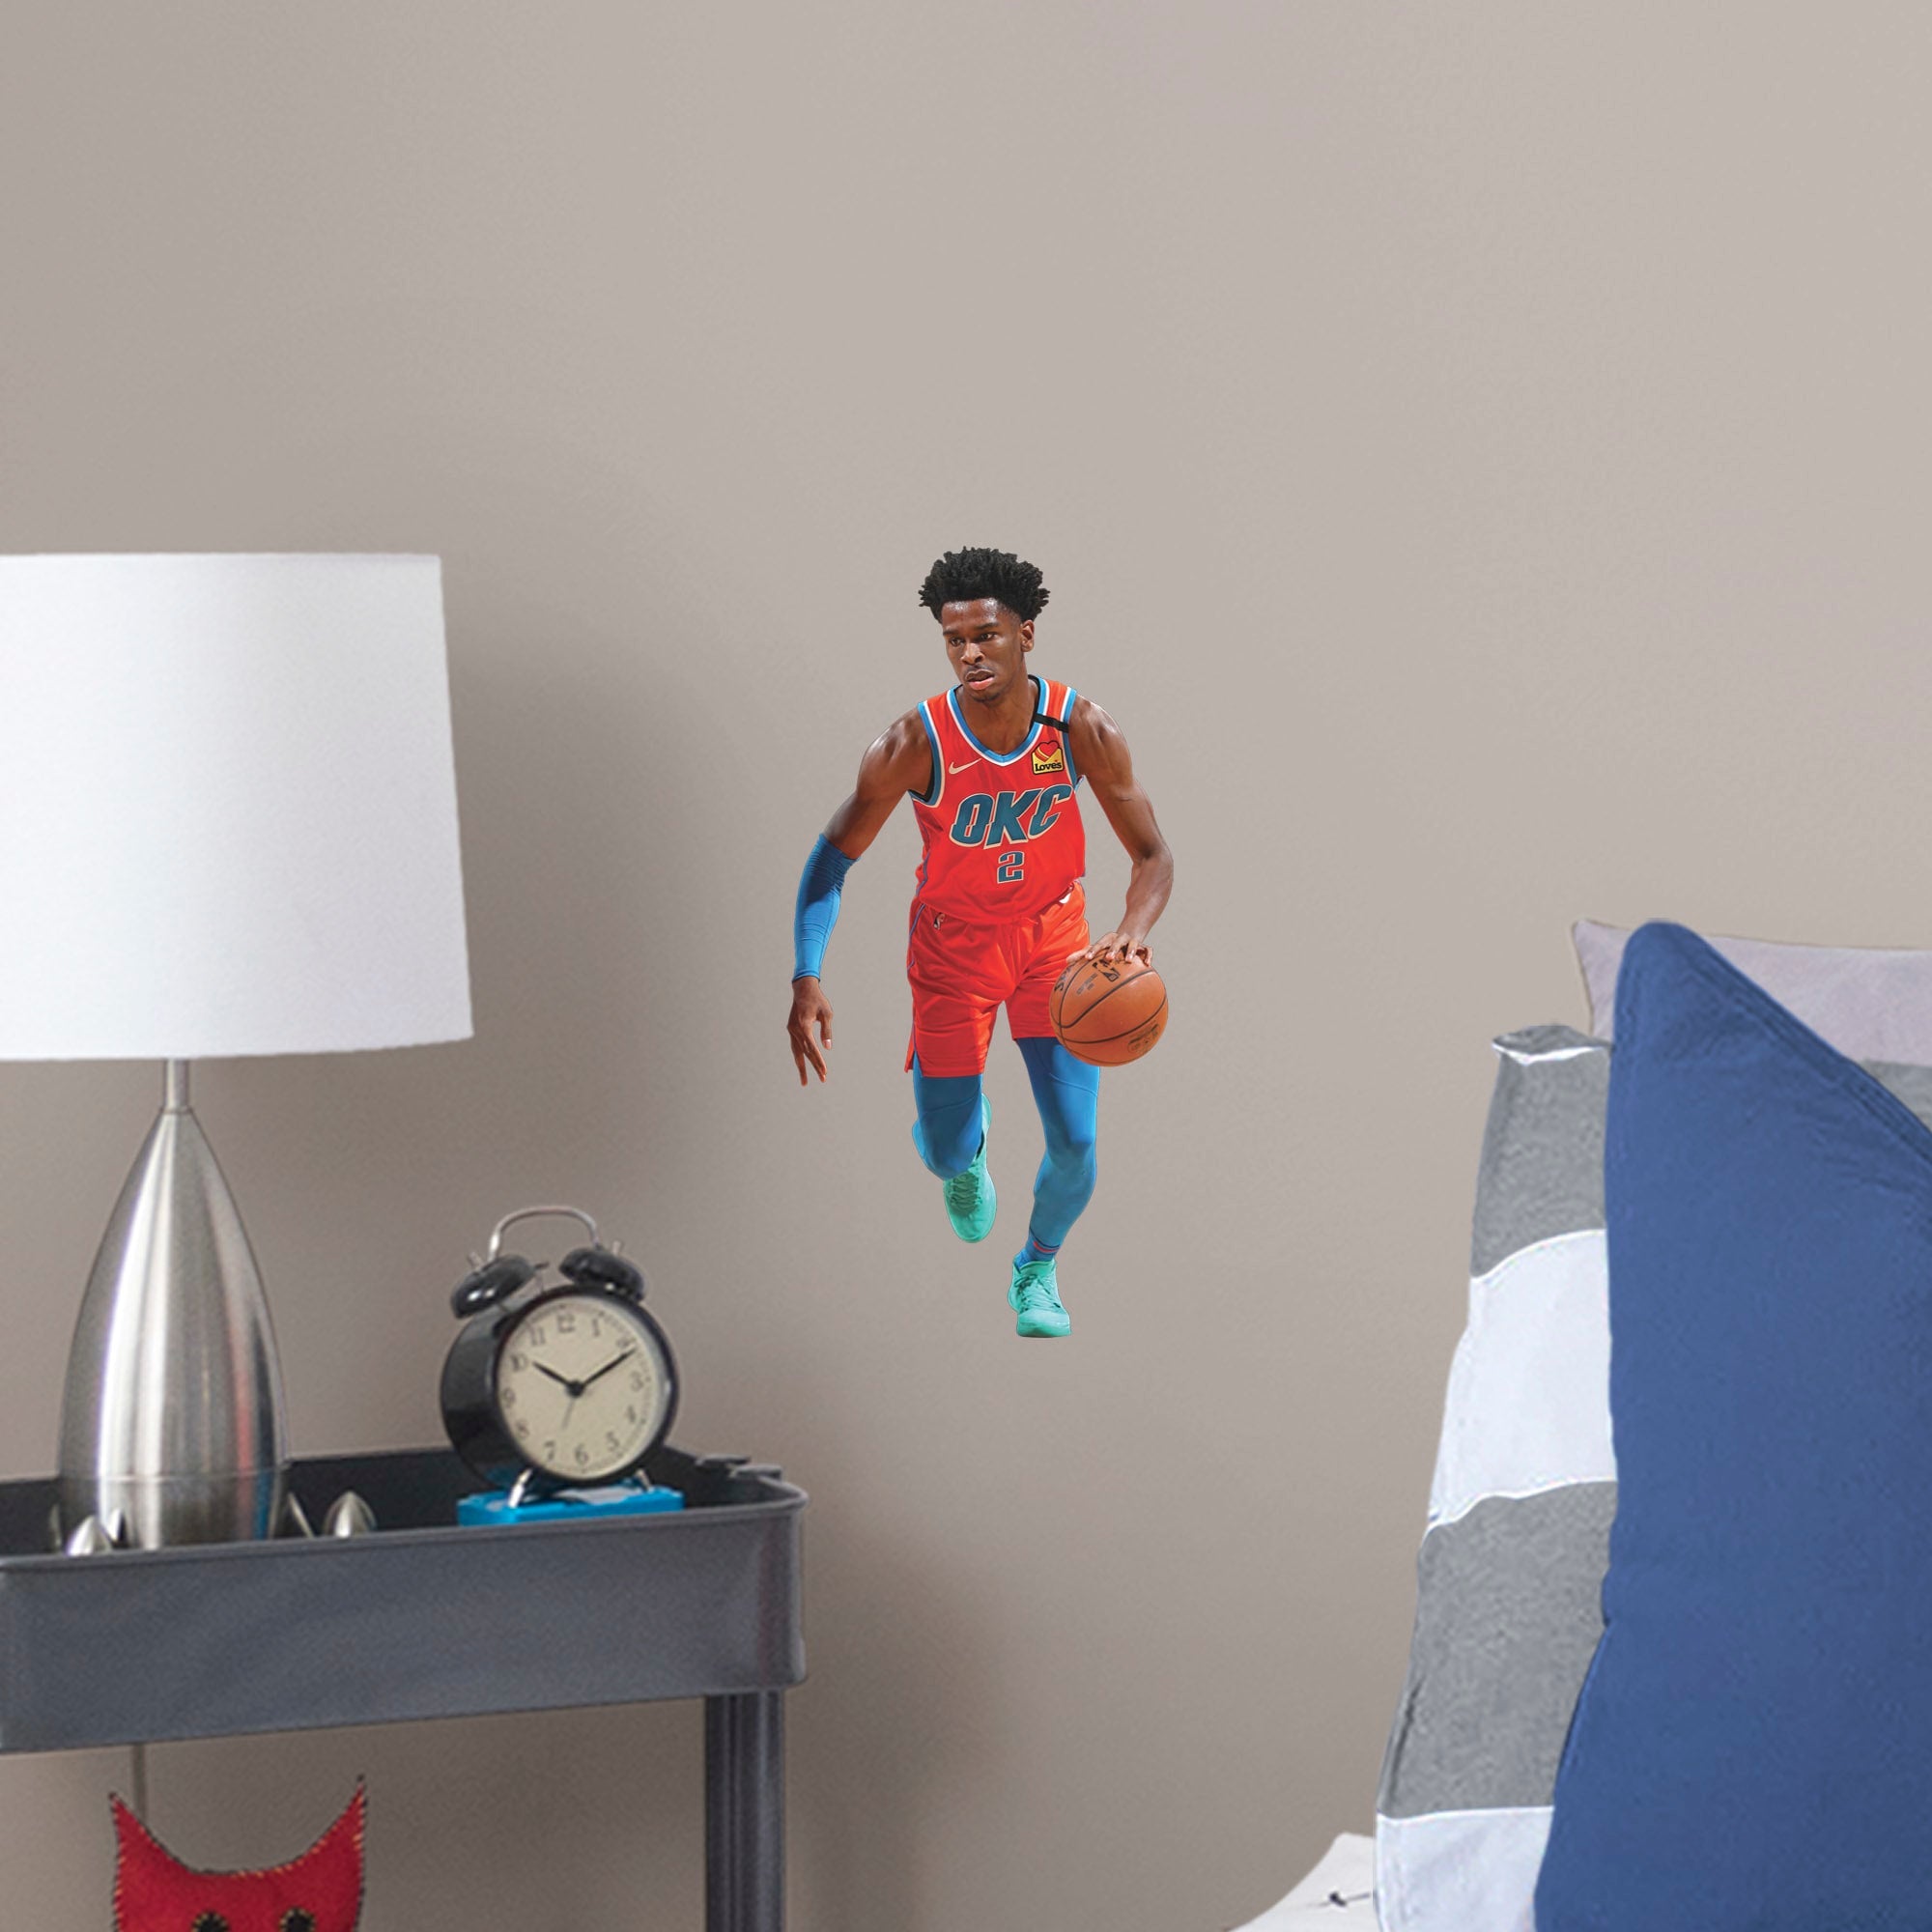 Shai Gilgeous-Alexander for Oklahoma City Thunder - Officially Licensed NBA Removable Wall Decal Large by Fathead | Vinyl